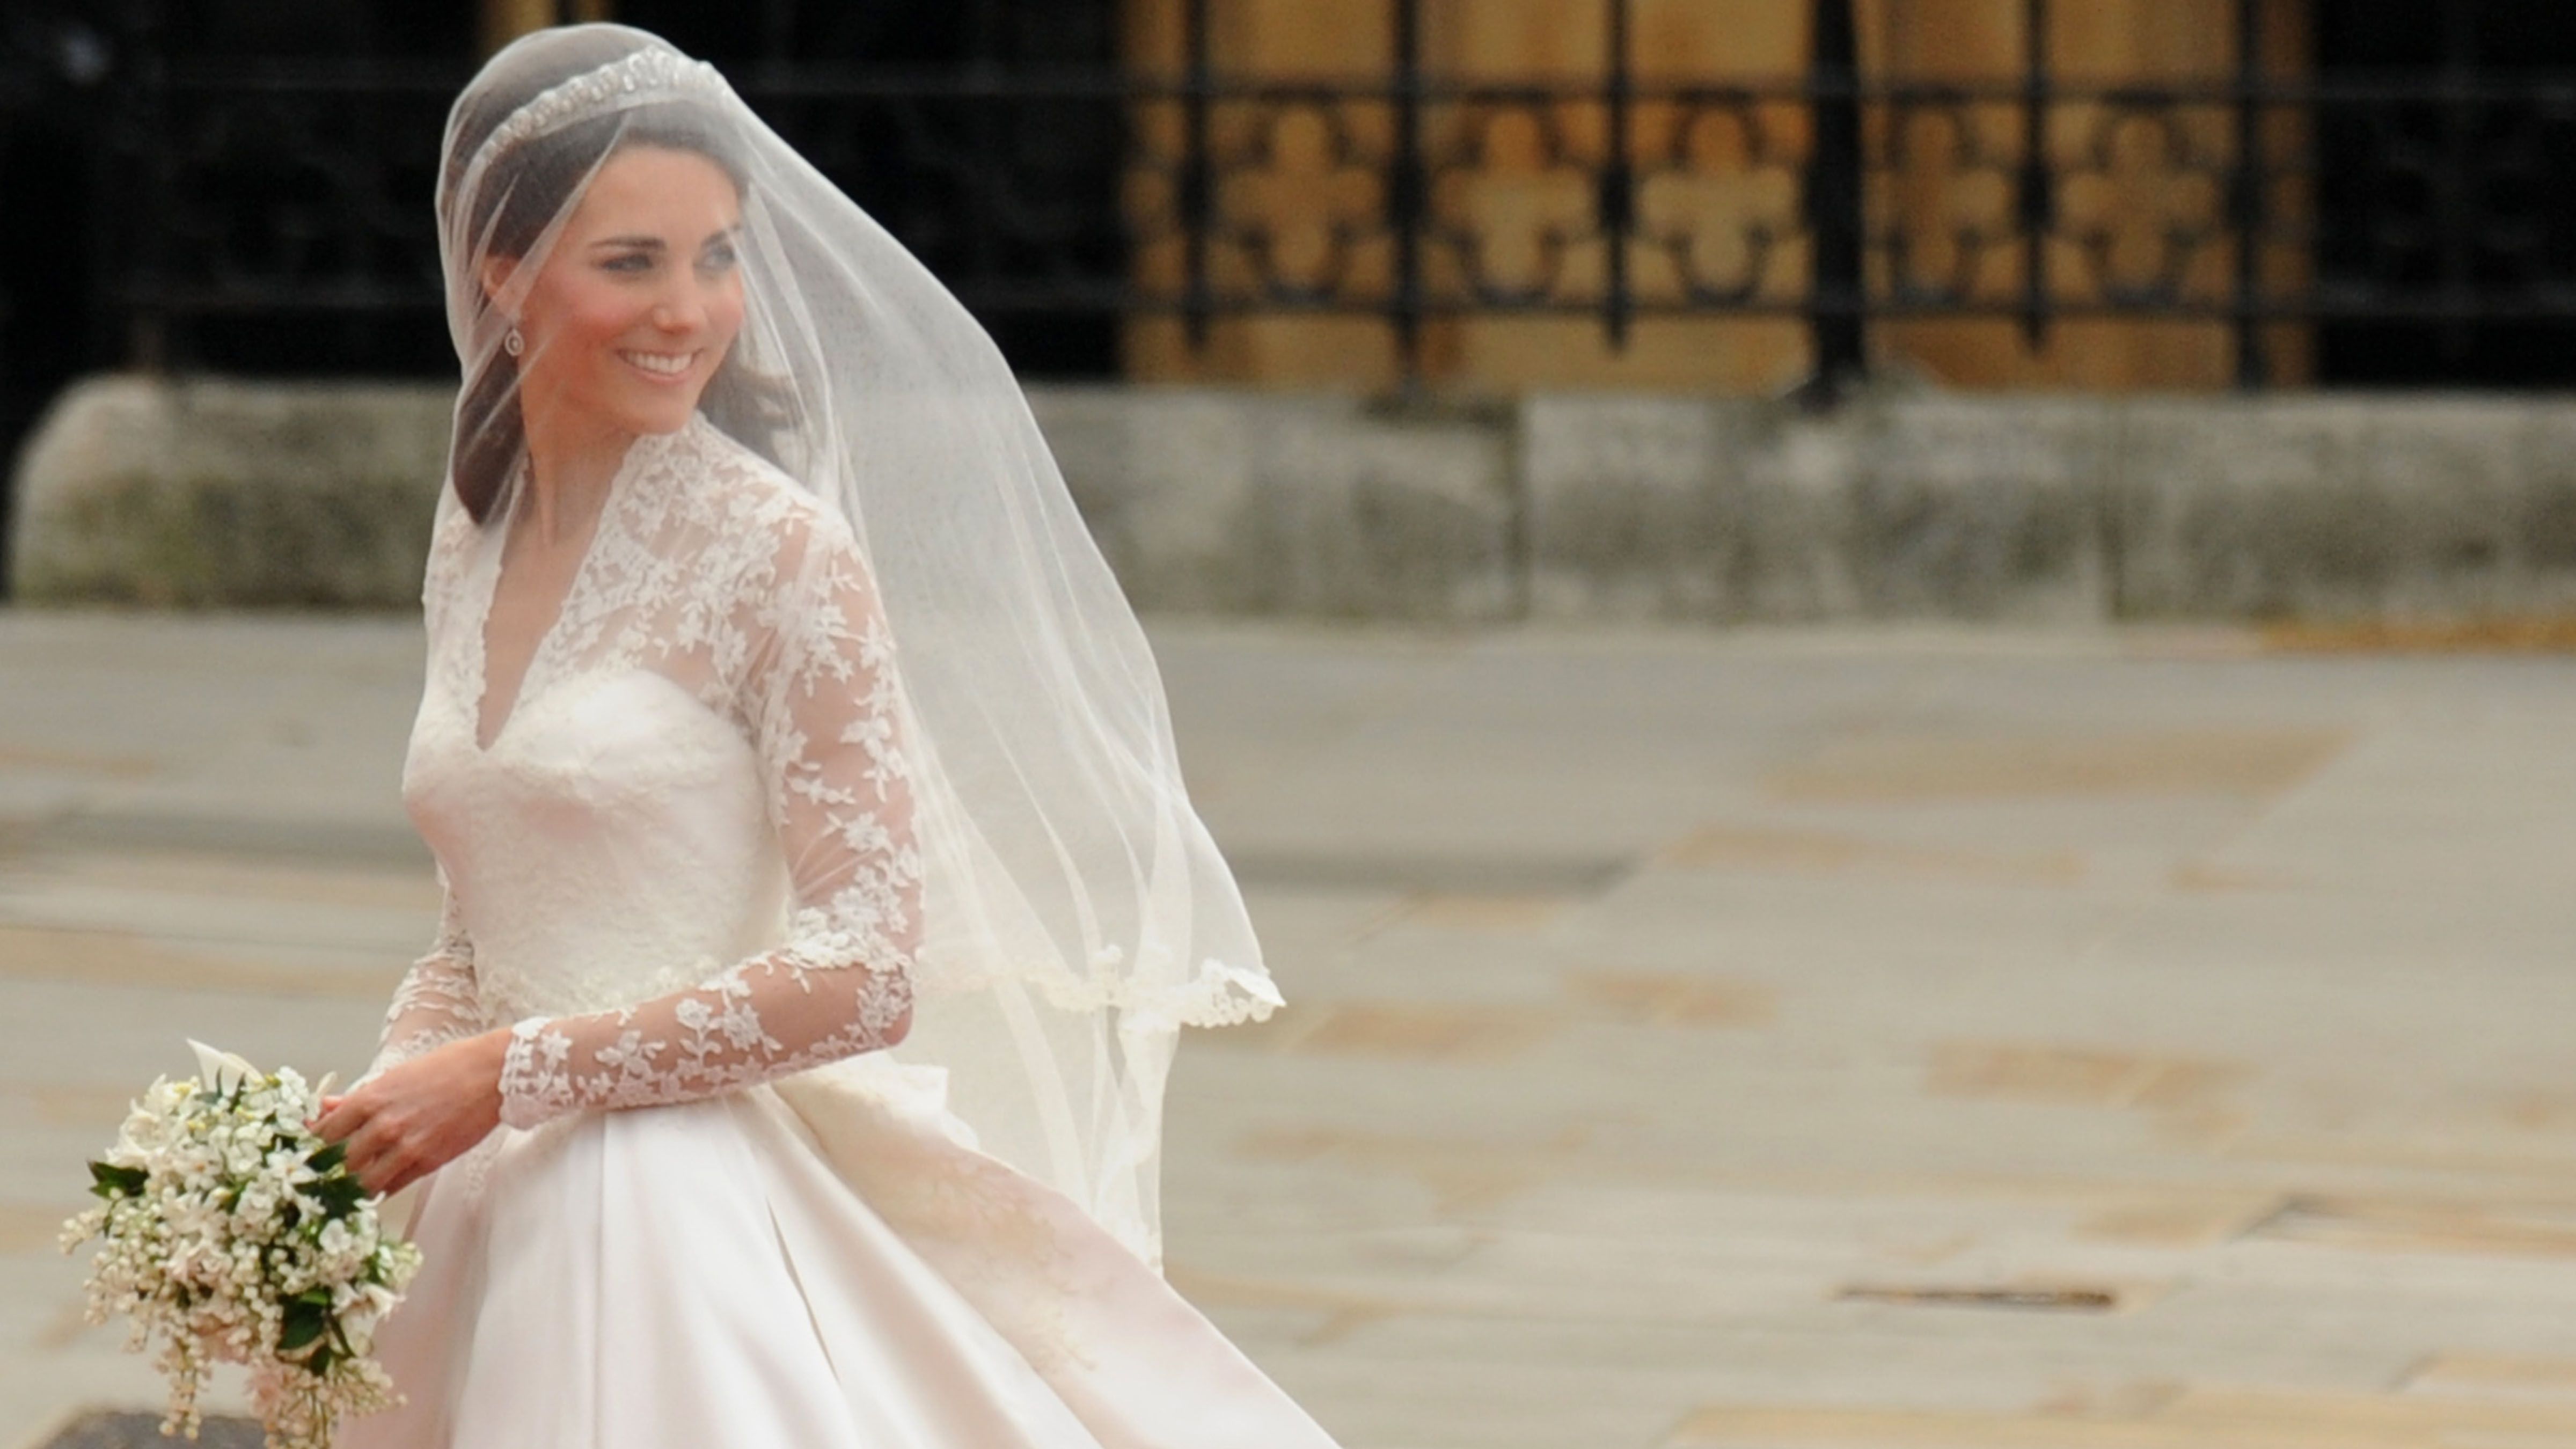 Why Wedding Dresses Are White